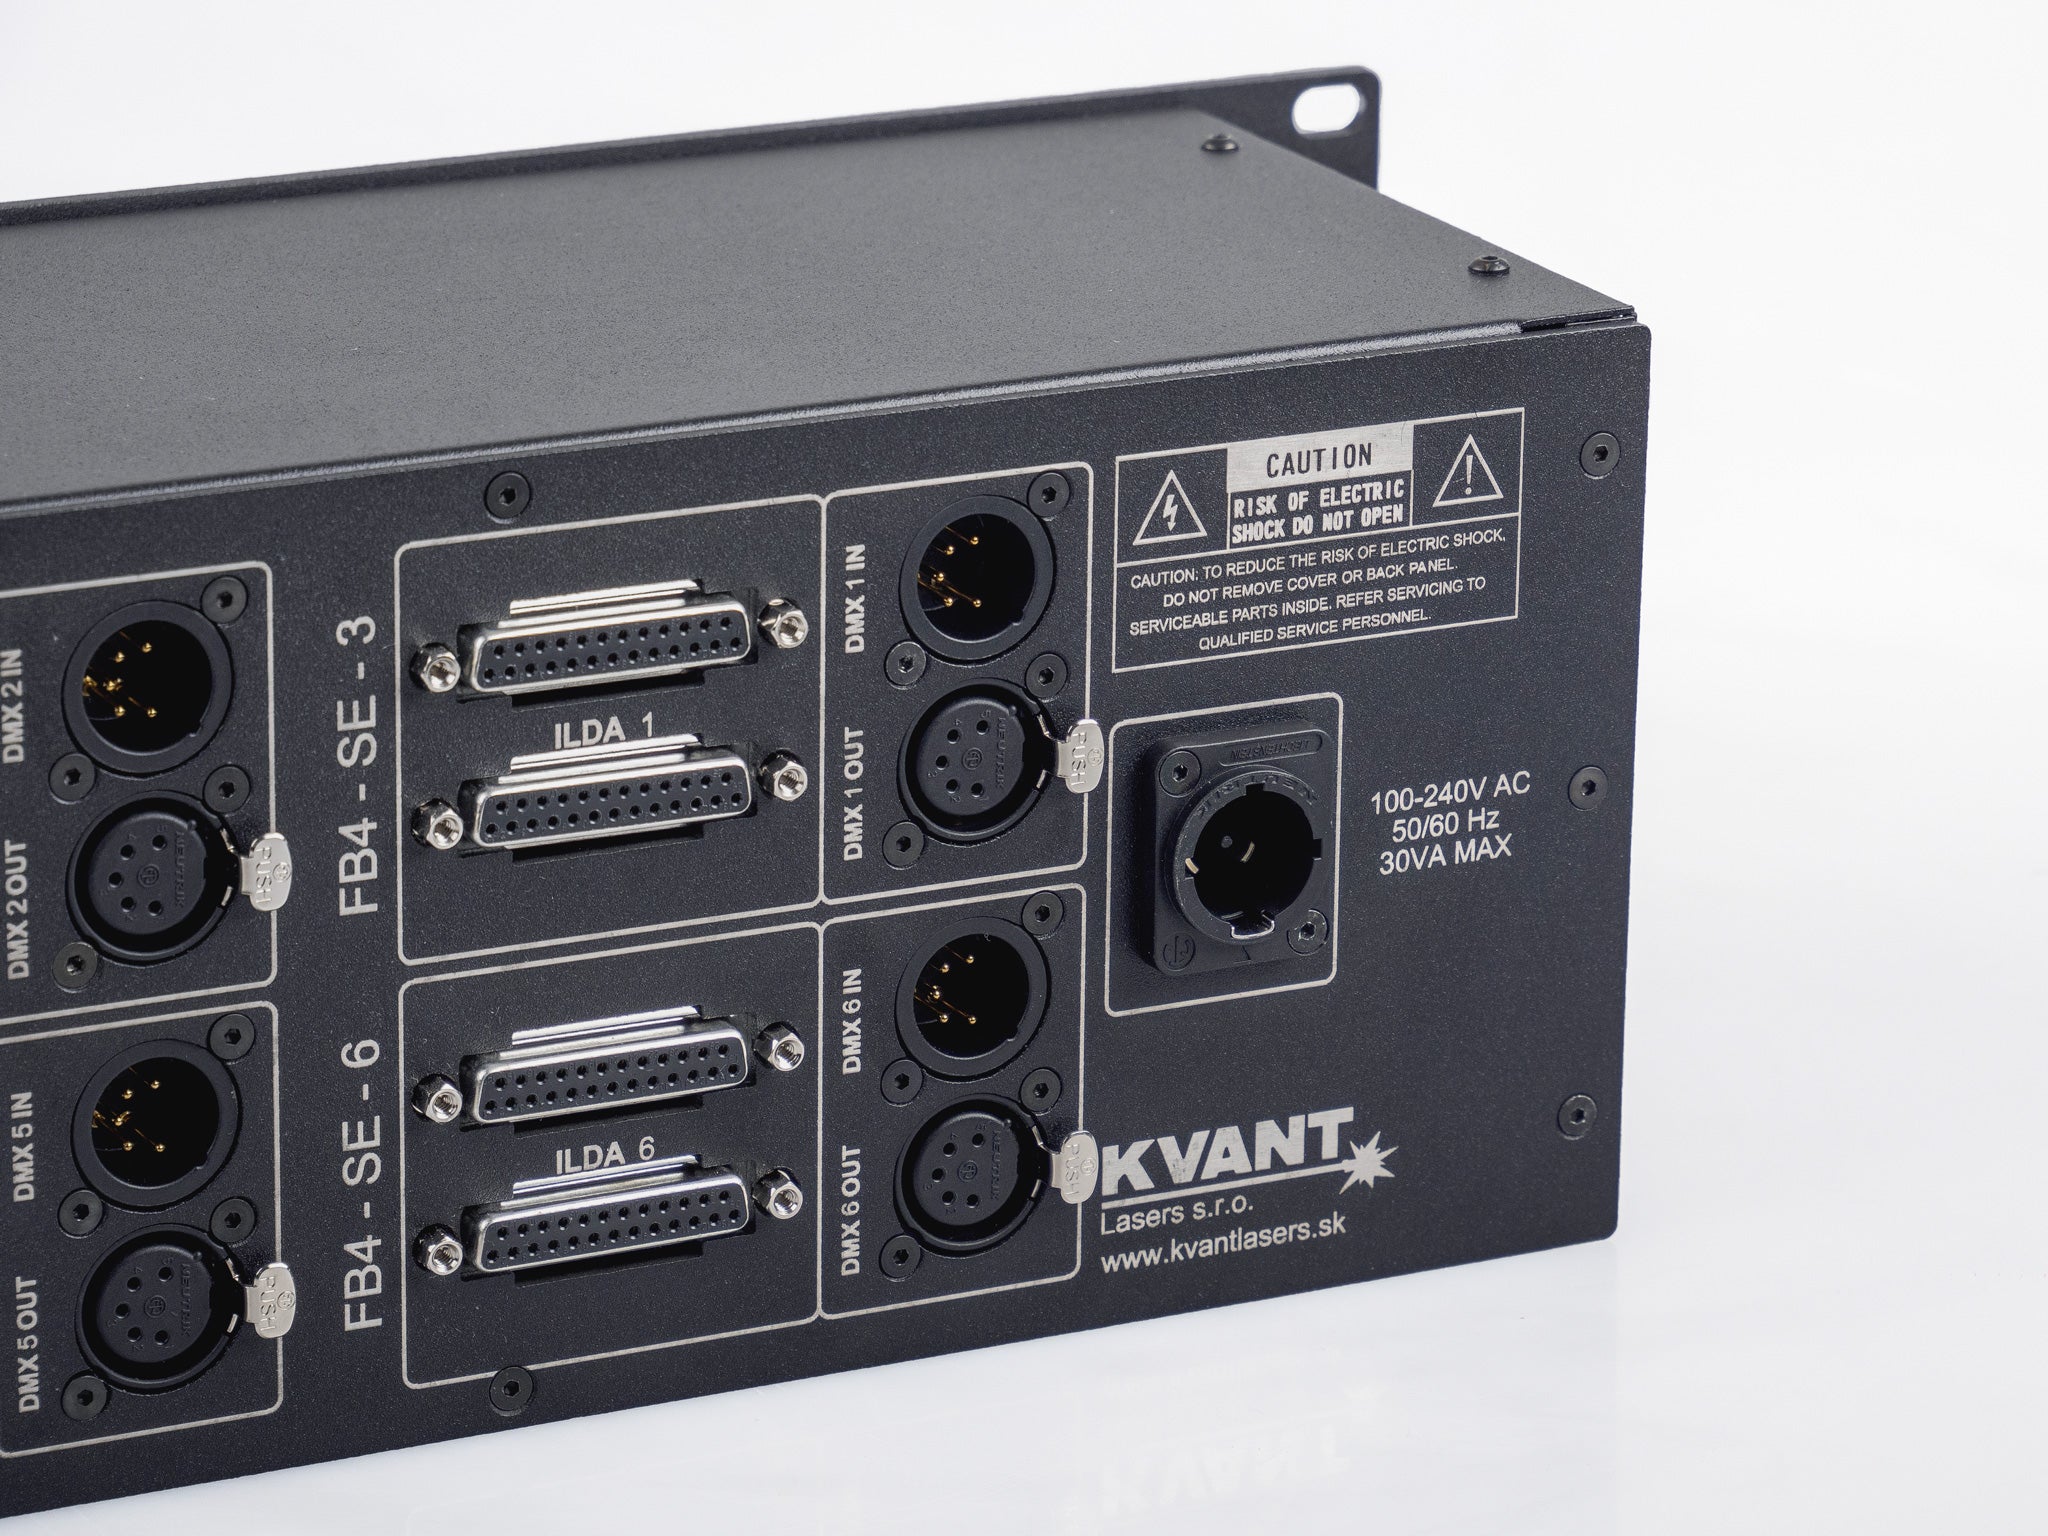 Kvant Lasers - Multichannel laser control interface with six FB4 boards and ILDA, DMX and ArtNet_5